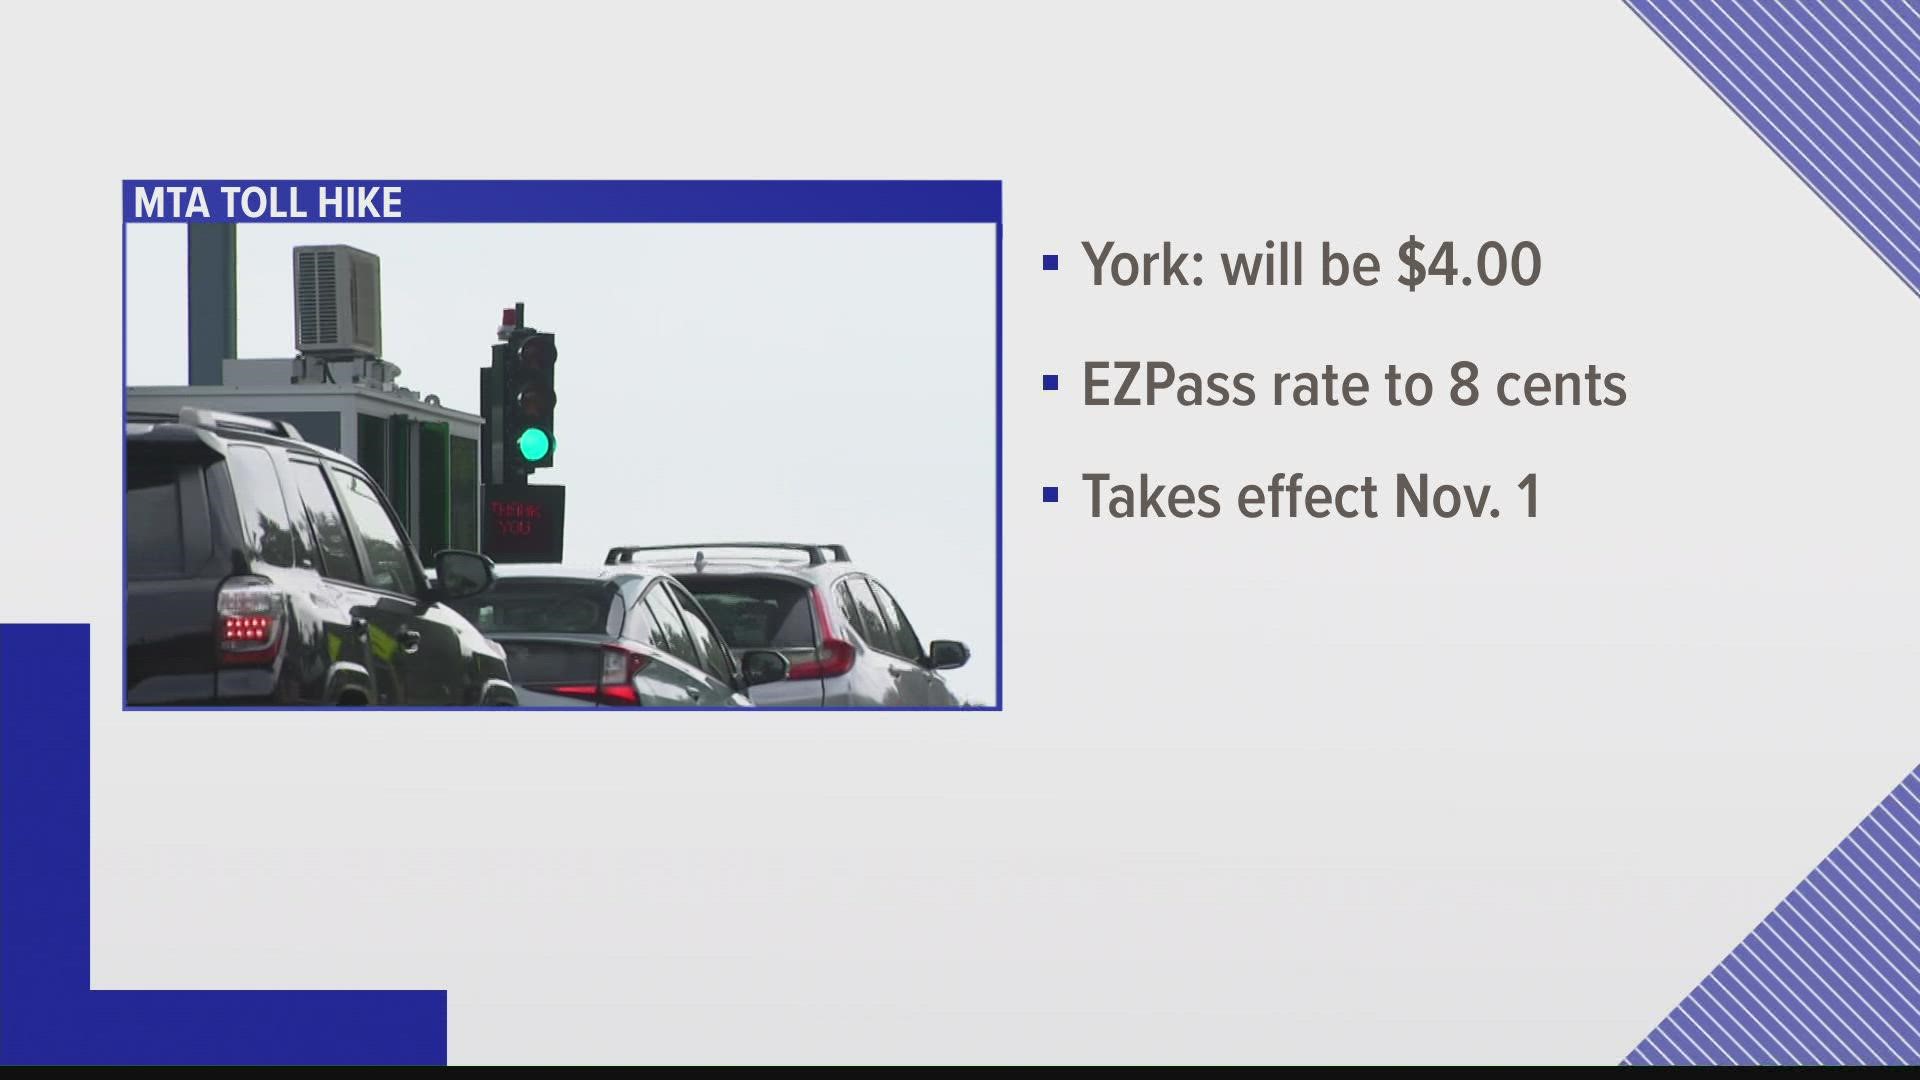 The York toll will go up from $3 to $4 for passenger car cash rate. Officials are also adjusting thresholds, so discounts on more travel will decrease.